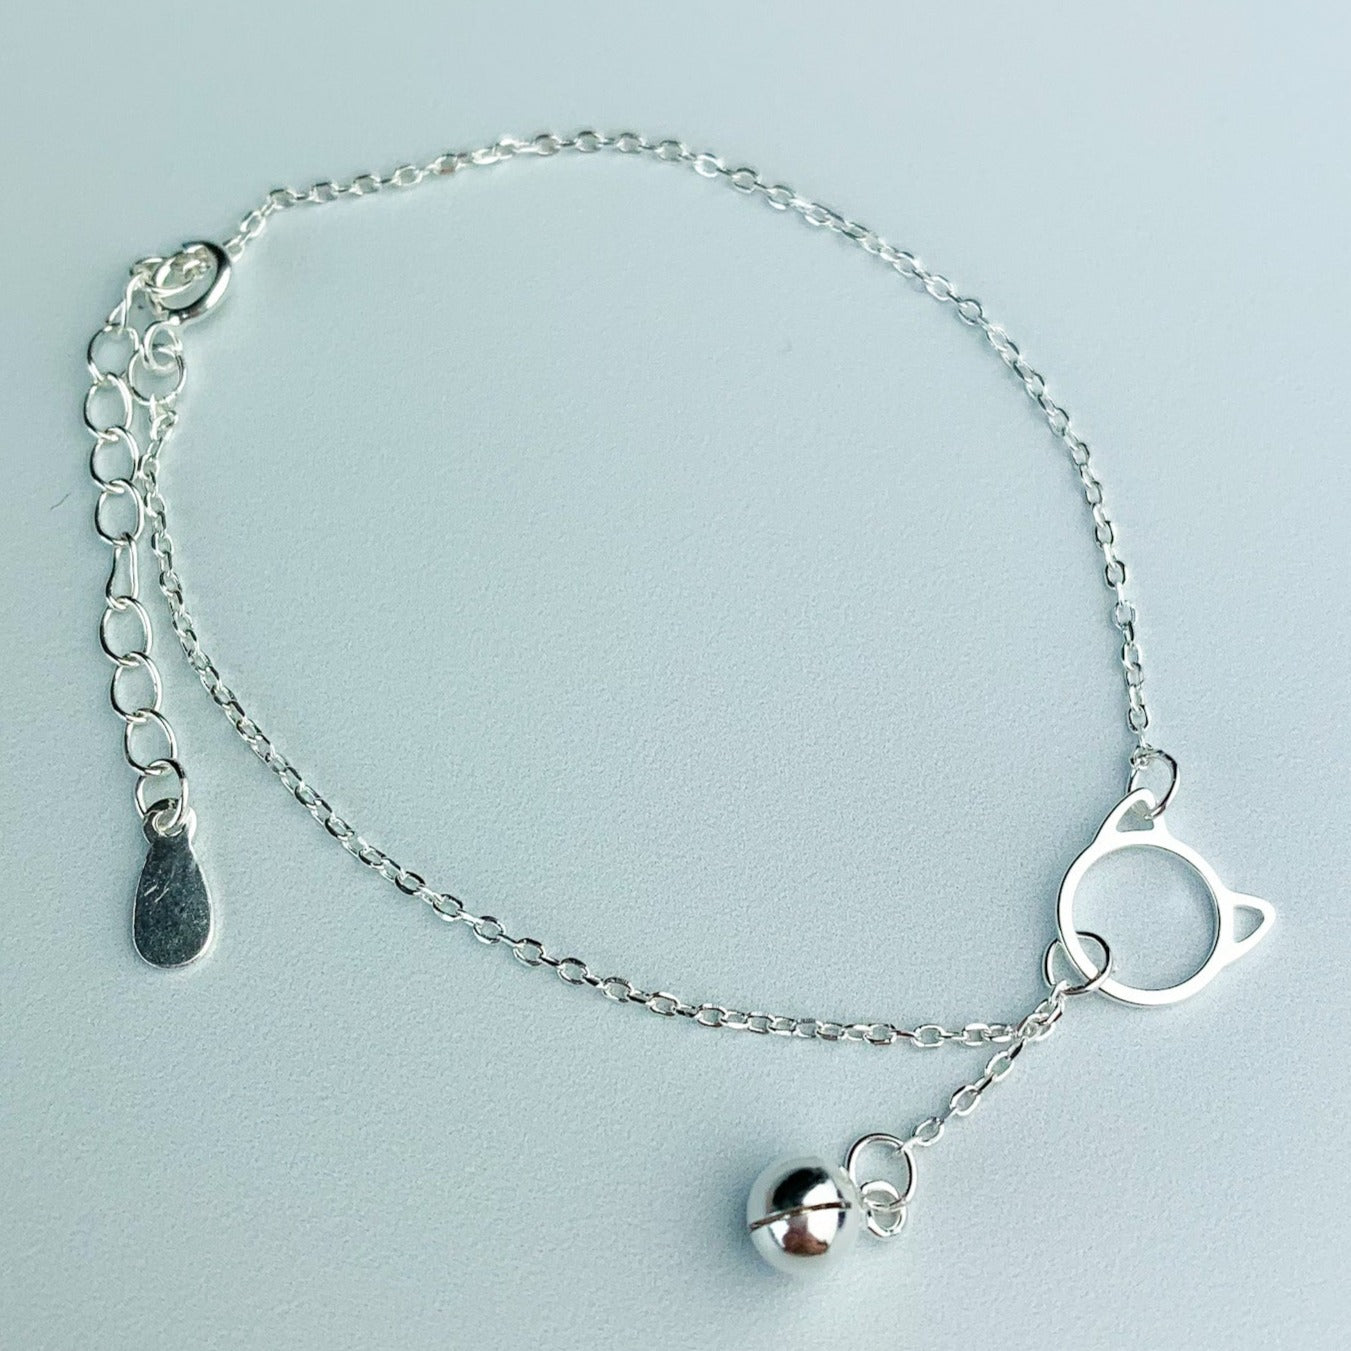 Cat Bracelet with Hanging Bell Charm